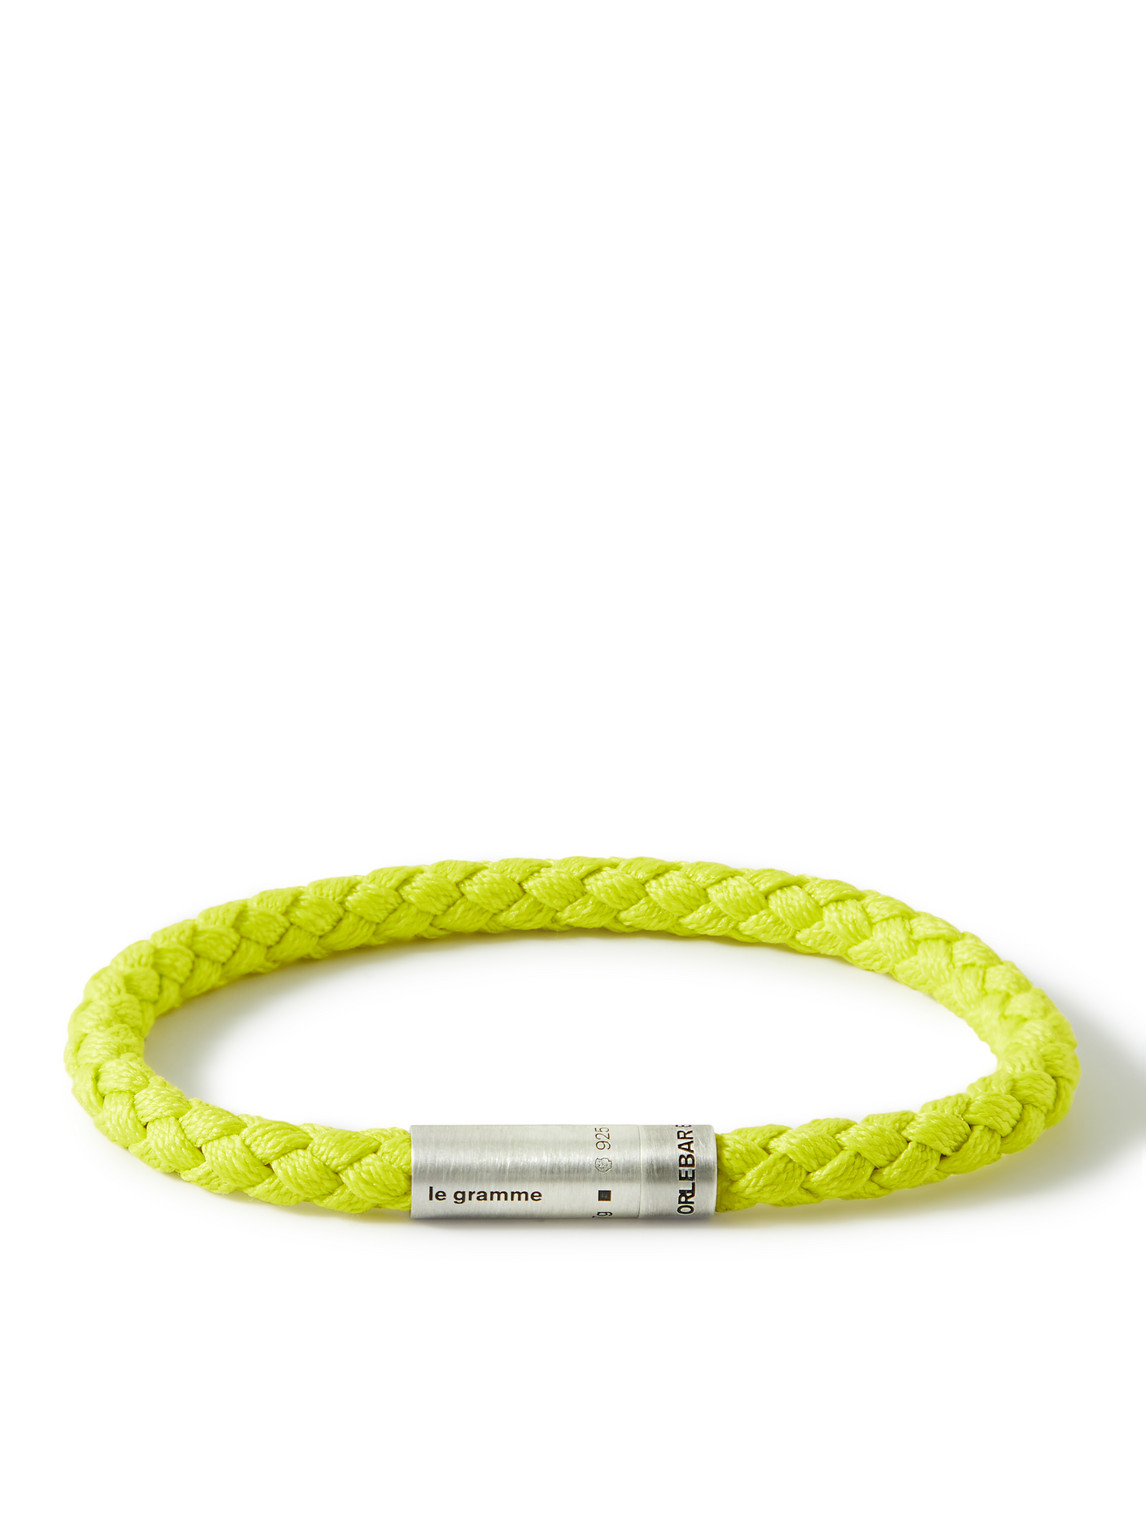 Le Gramme Orlebar Brown 7g Braided Cord And Sterling Silver Bracelet In Yellow